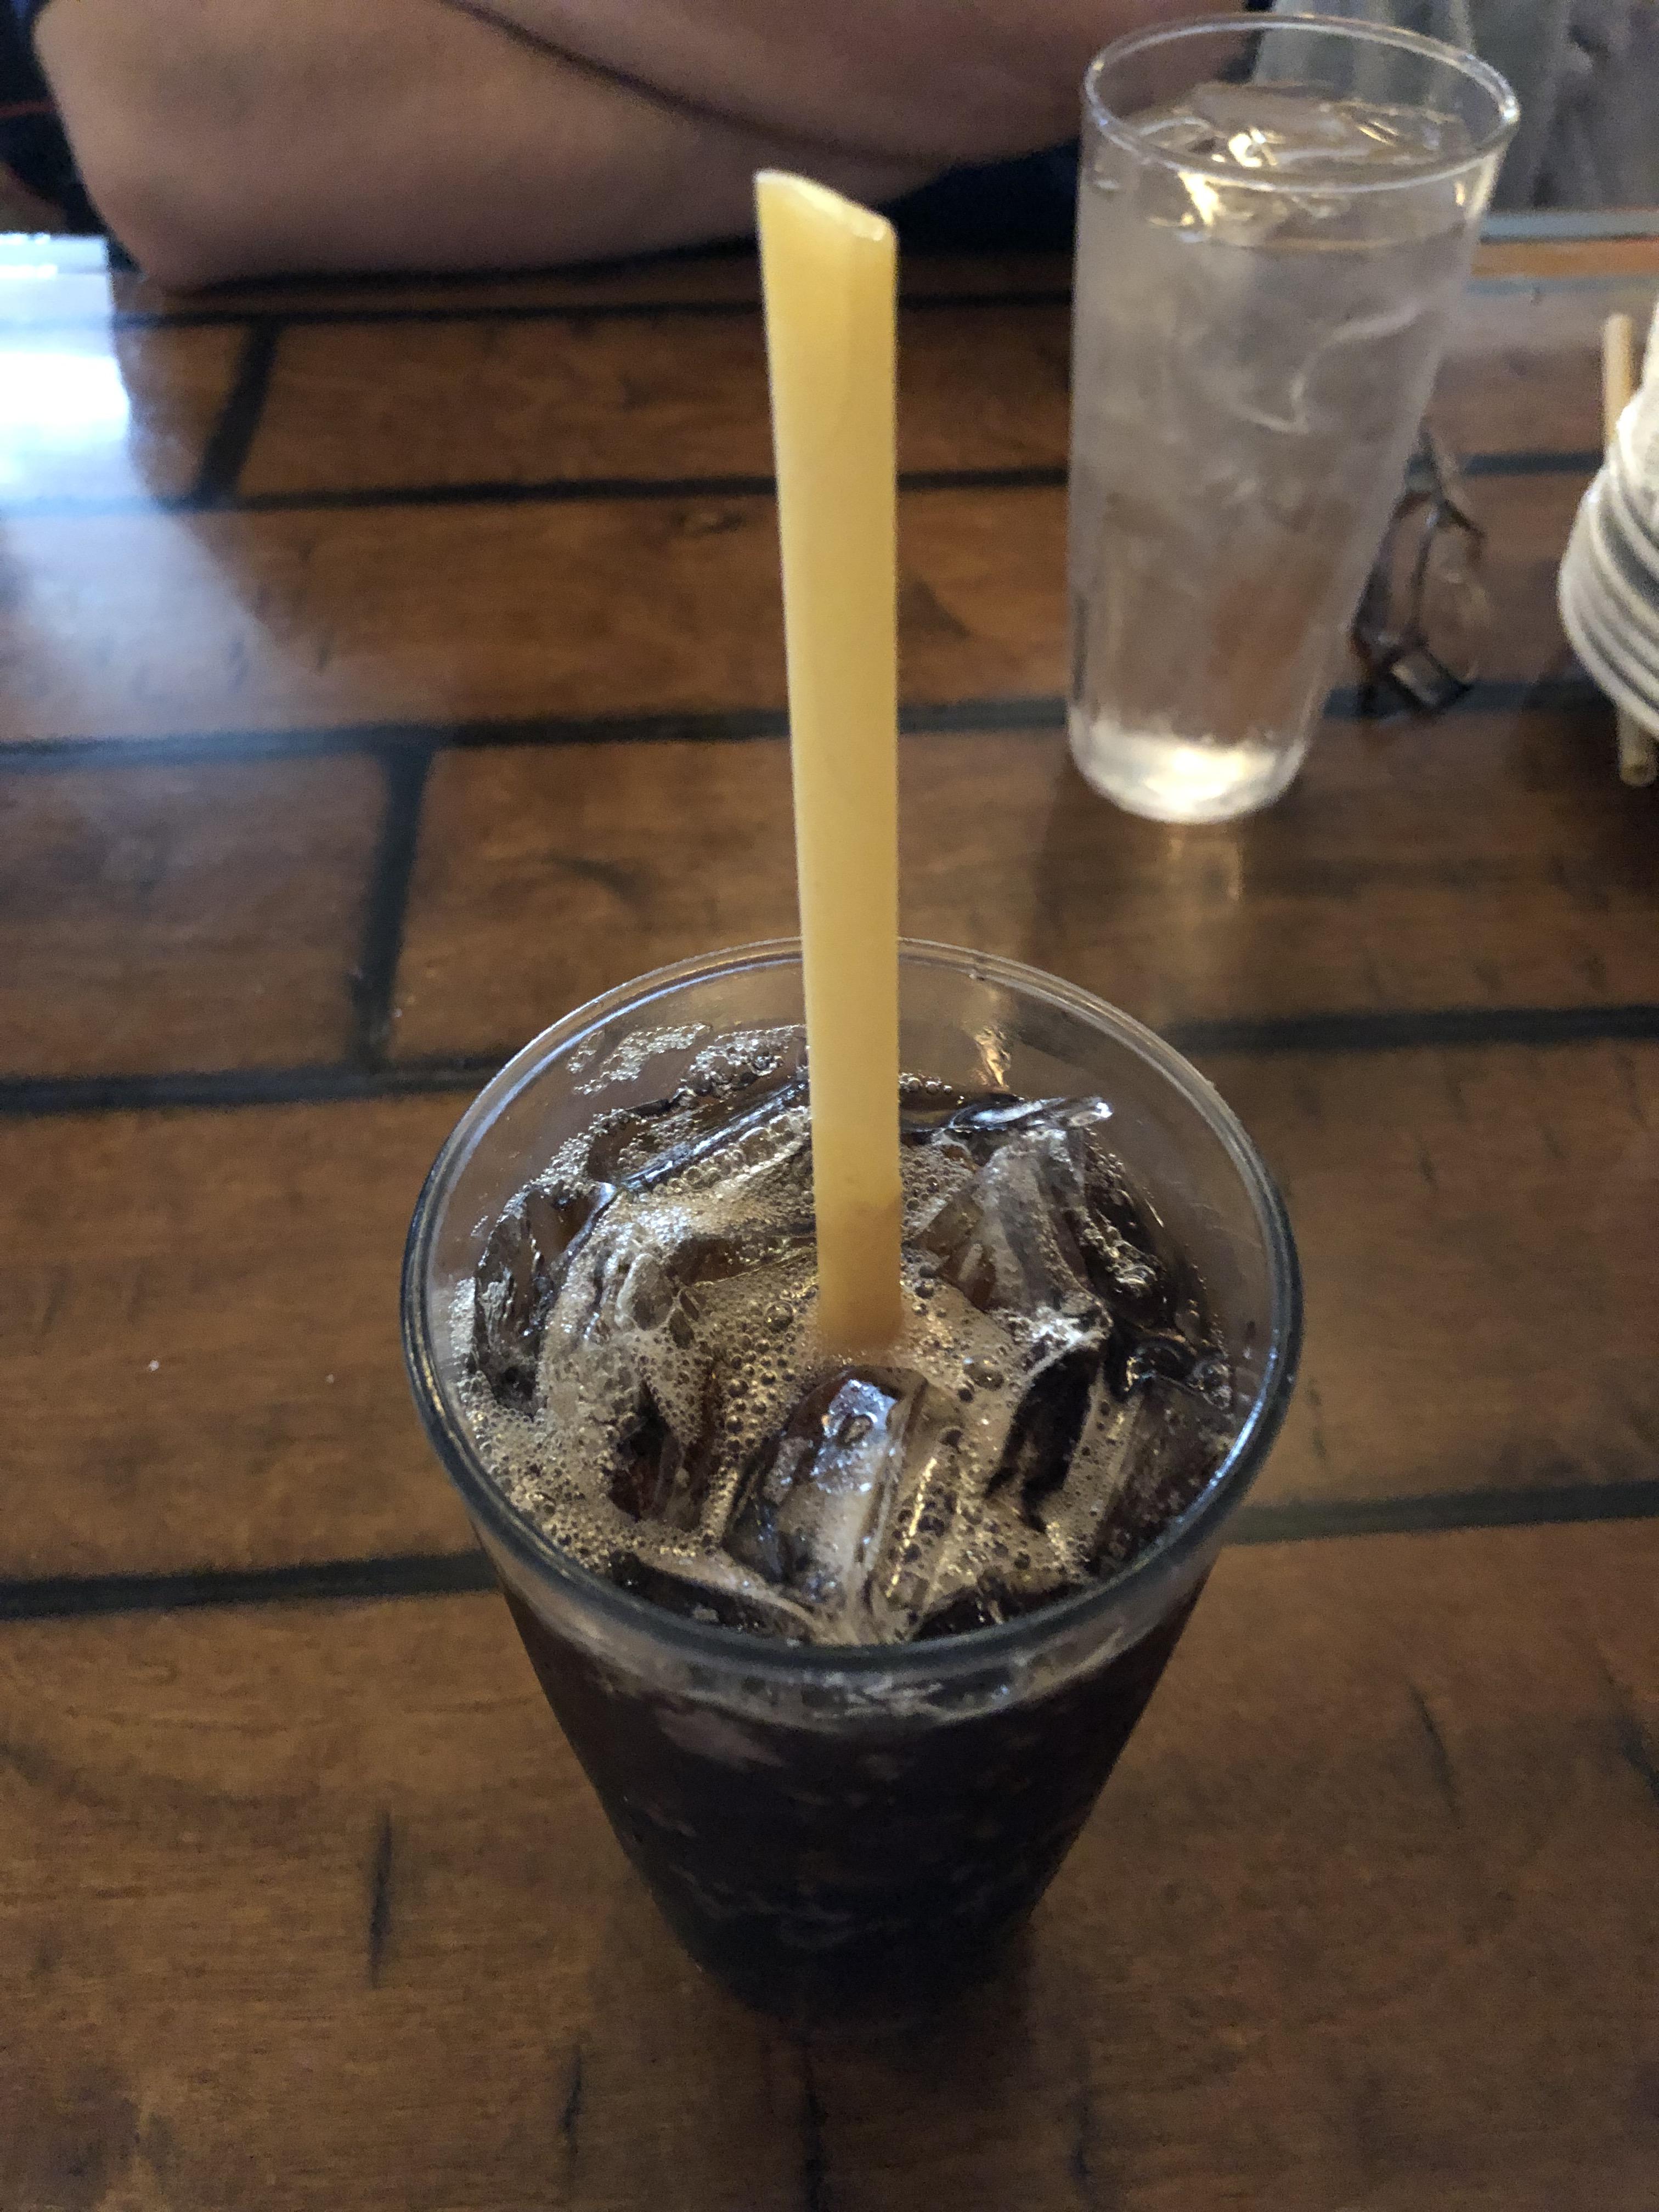 This Italian restaurant uses pasta noodles for straws.